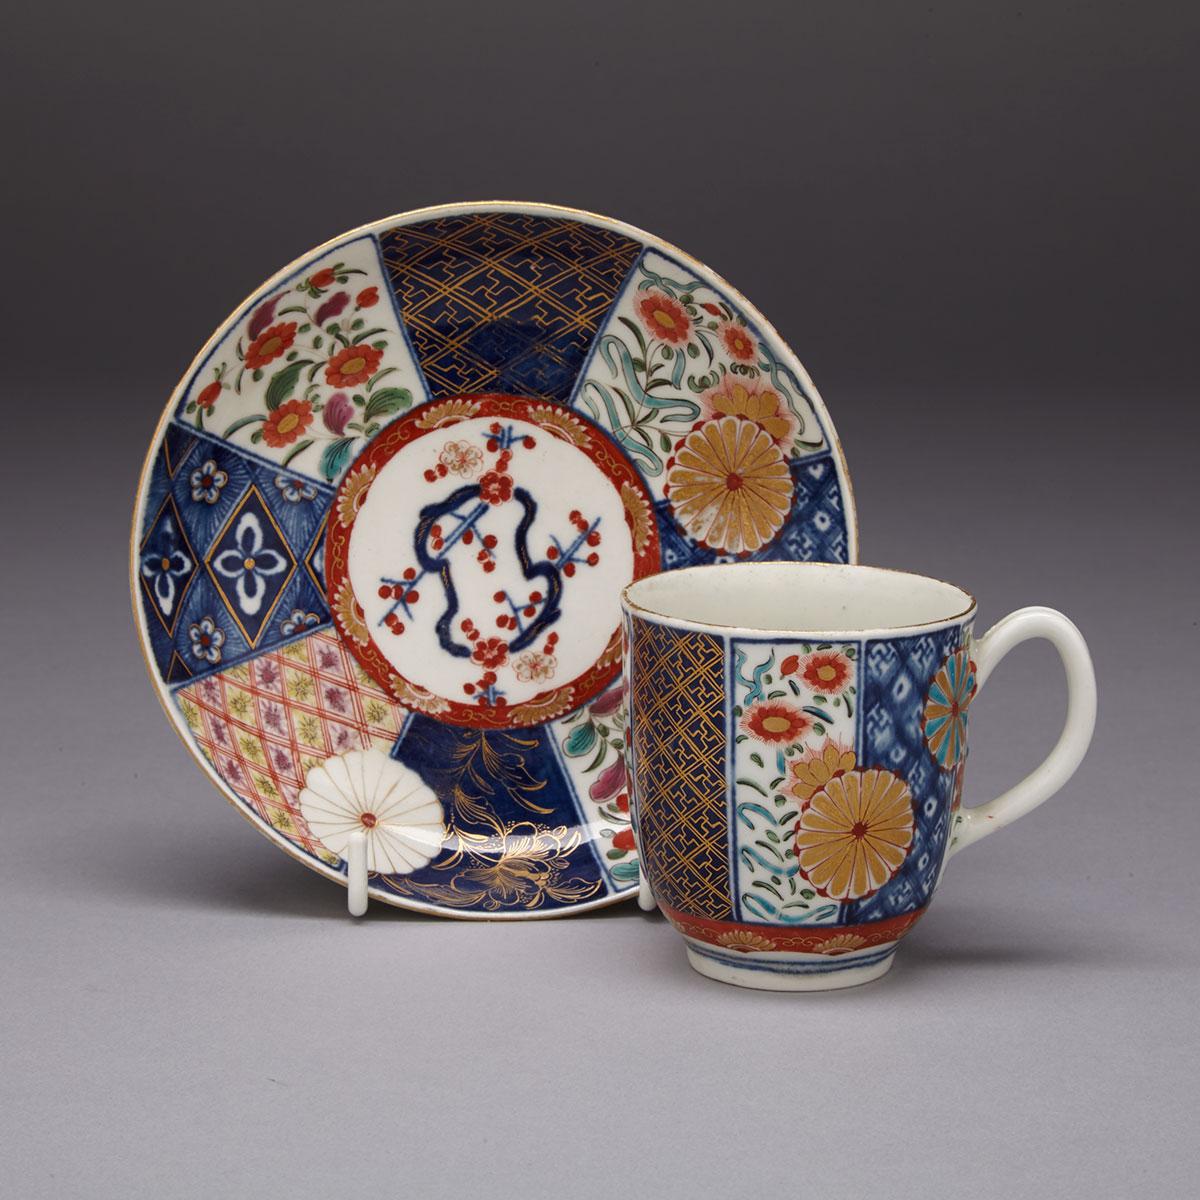 Worcester ‘Old Mosaic’ Japan Pattern Coffee Cup and Saucer c.1770